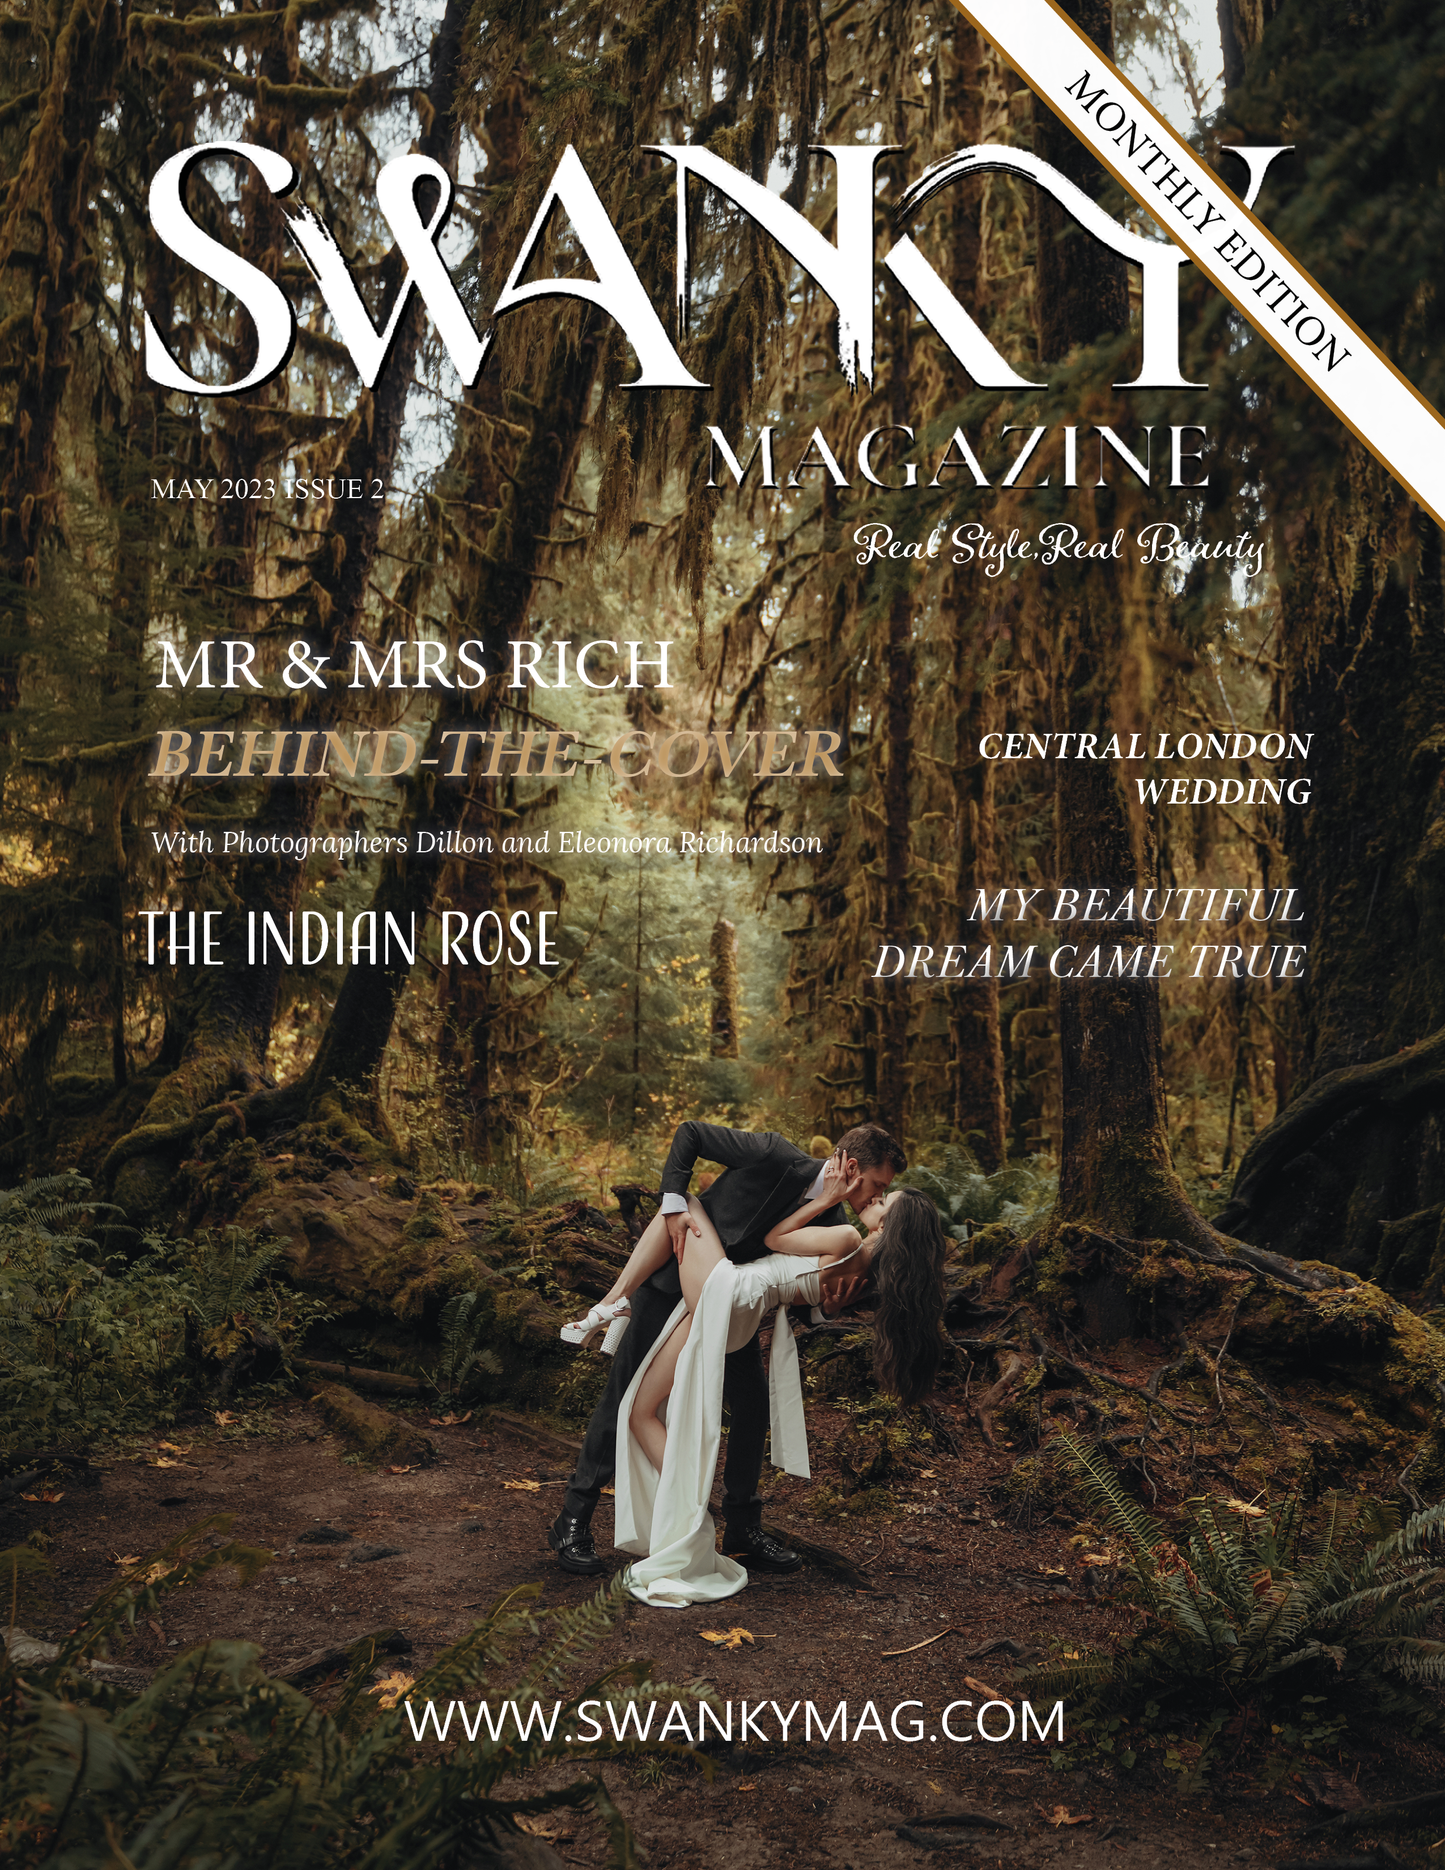 Swanky Wedding Edition May 2023 issue 2